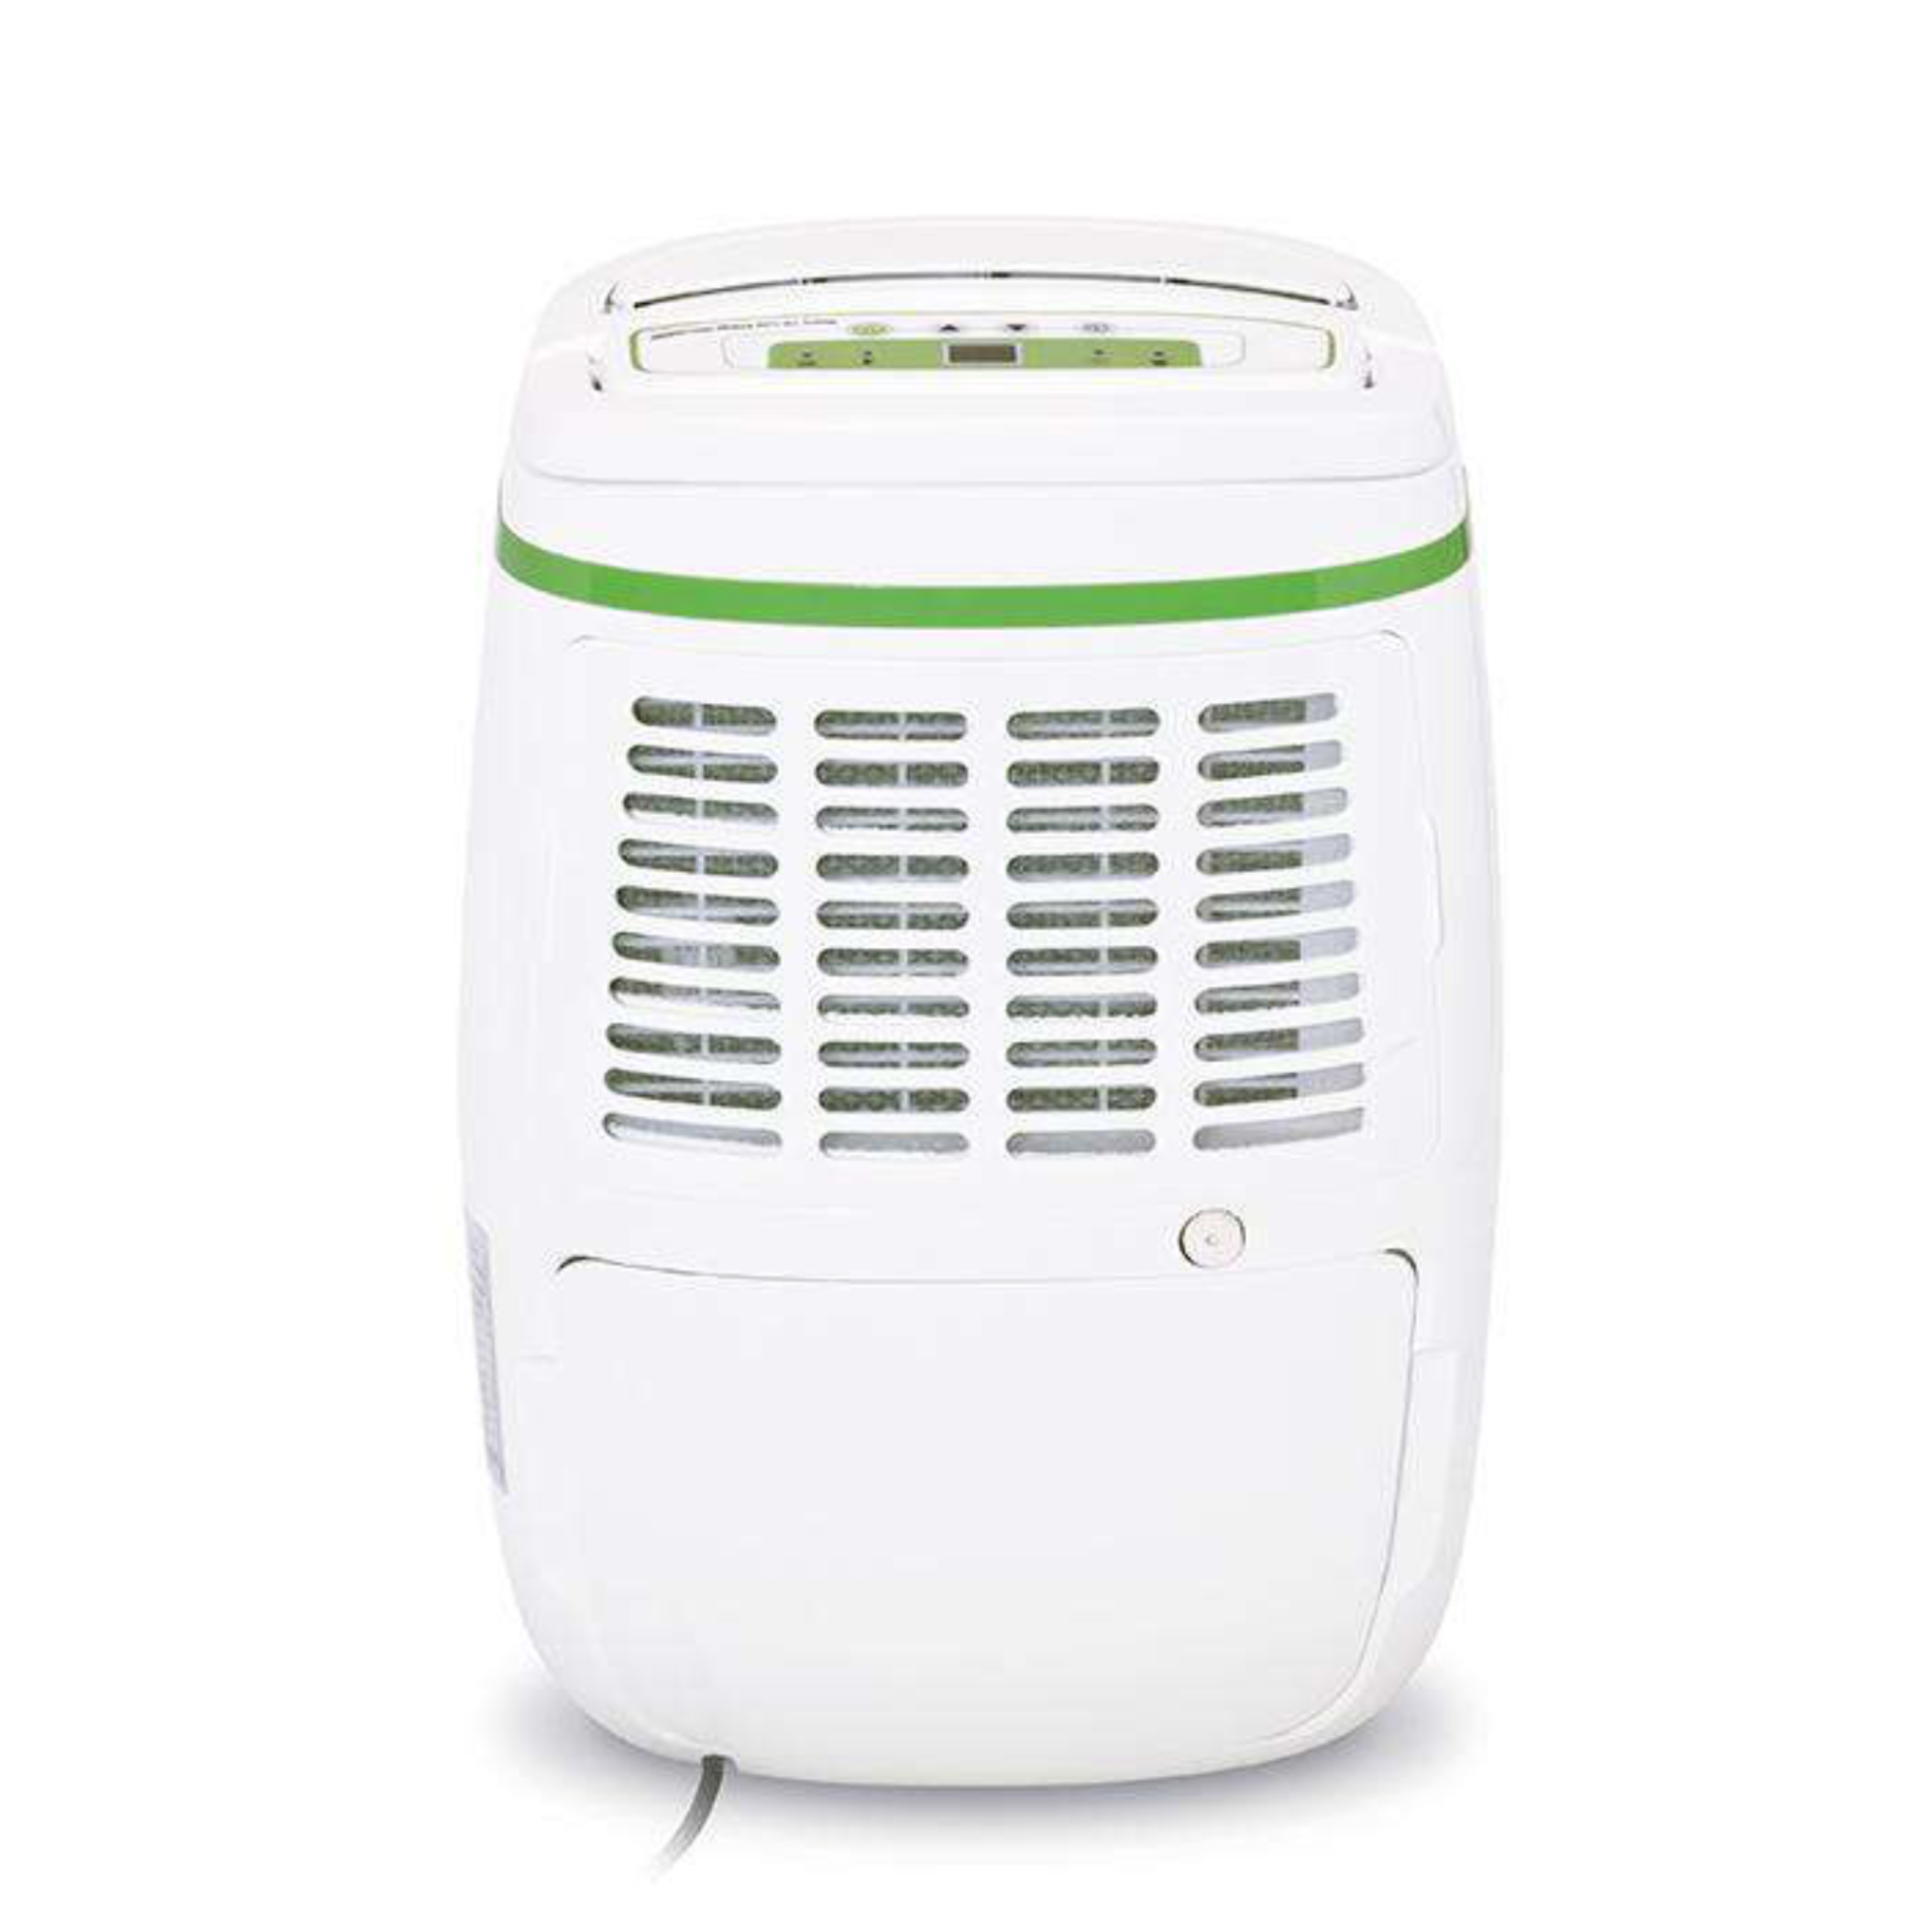 new meaco 12l low energy dehumidifier and air purifier rrp £199 - Image 2 of 2